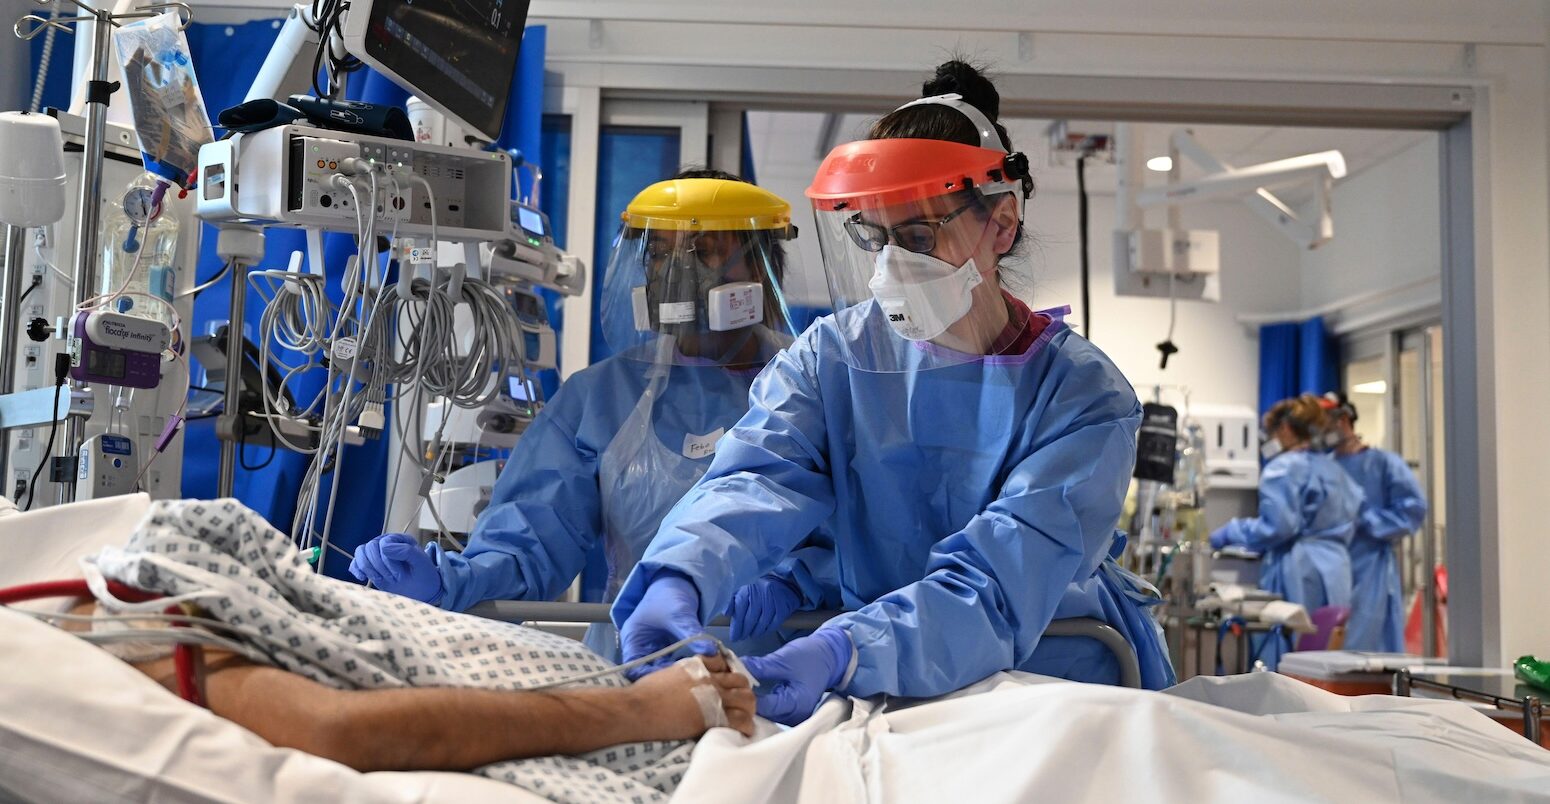 Medical personnel tend to a patient with COVID-19 in intensive care Cambridge, UK.